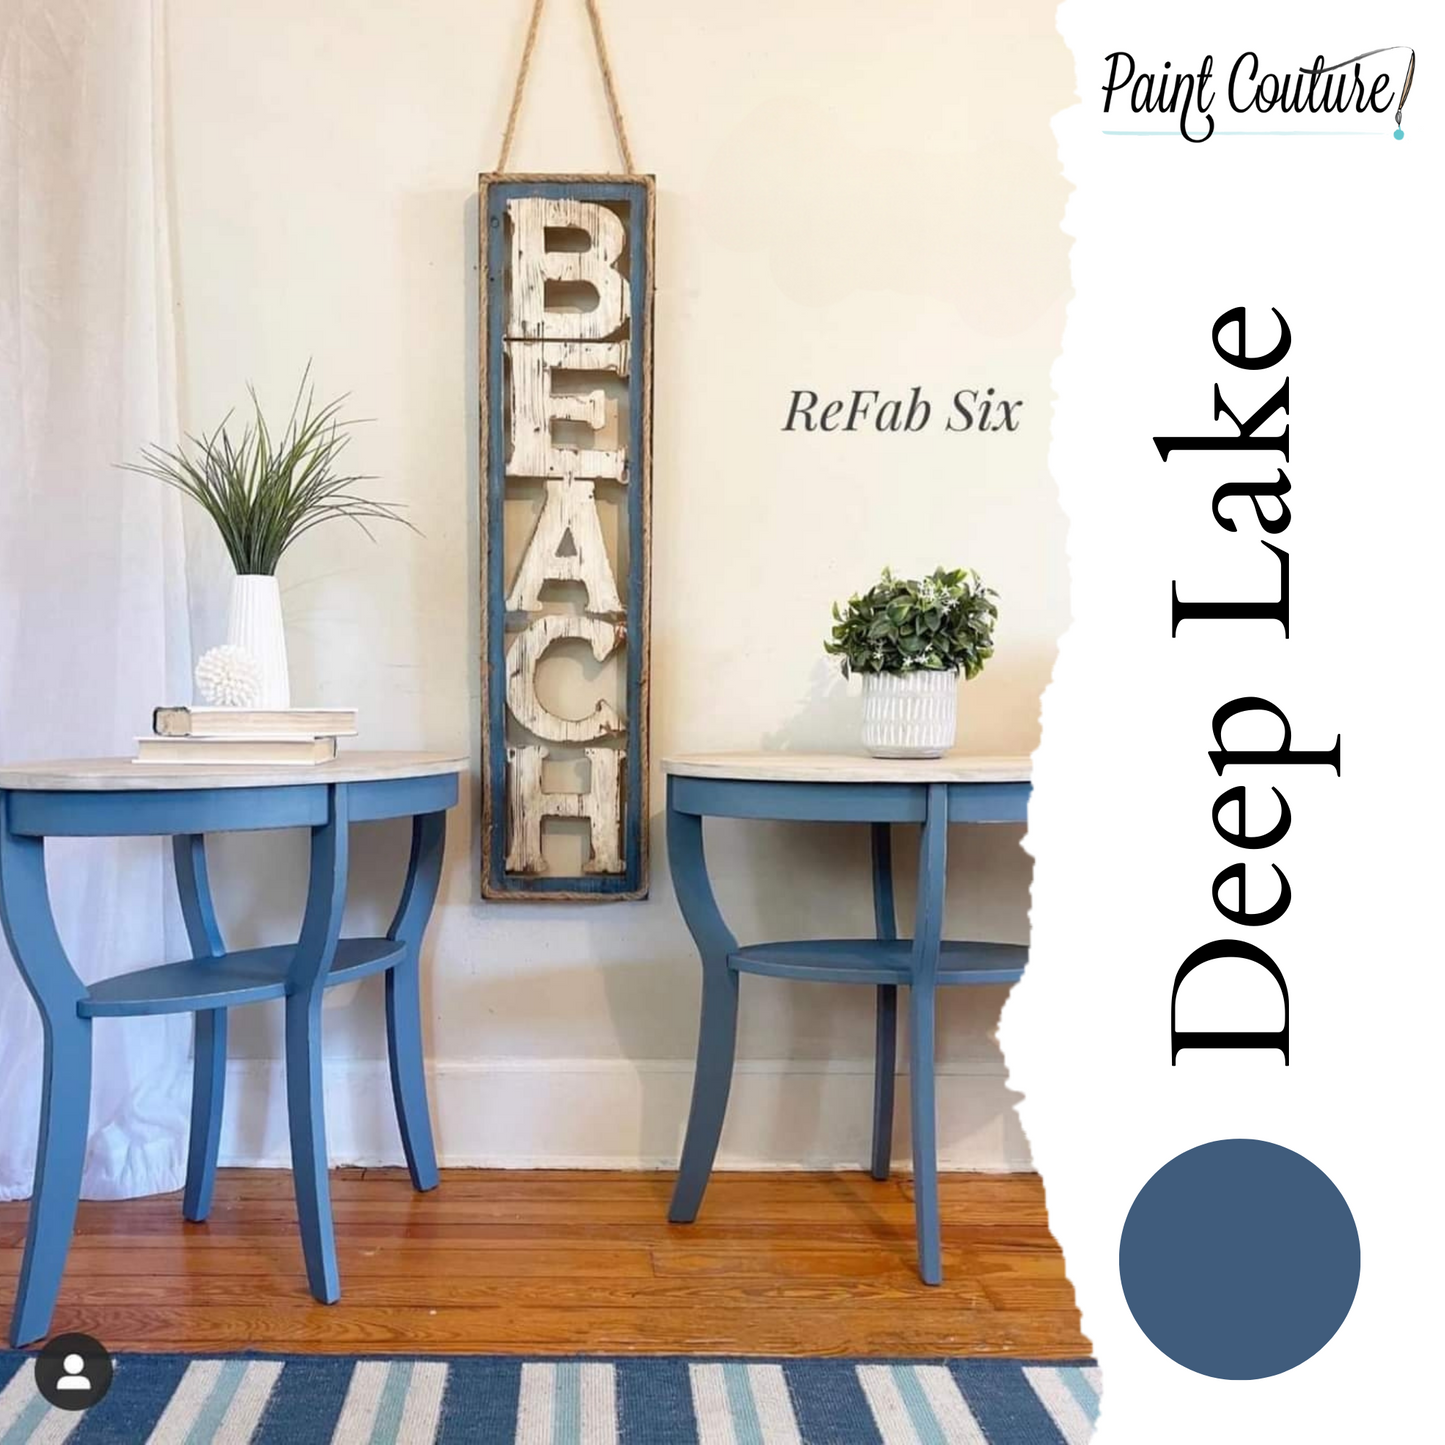 Paint Couture Deep Lake - Acrylic Mineral Paint with a Flat Finish!